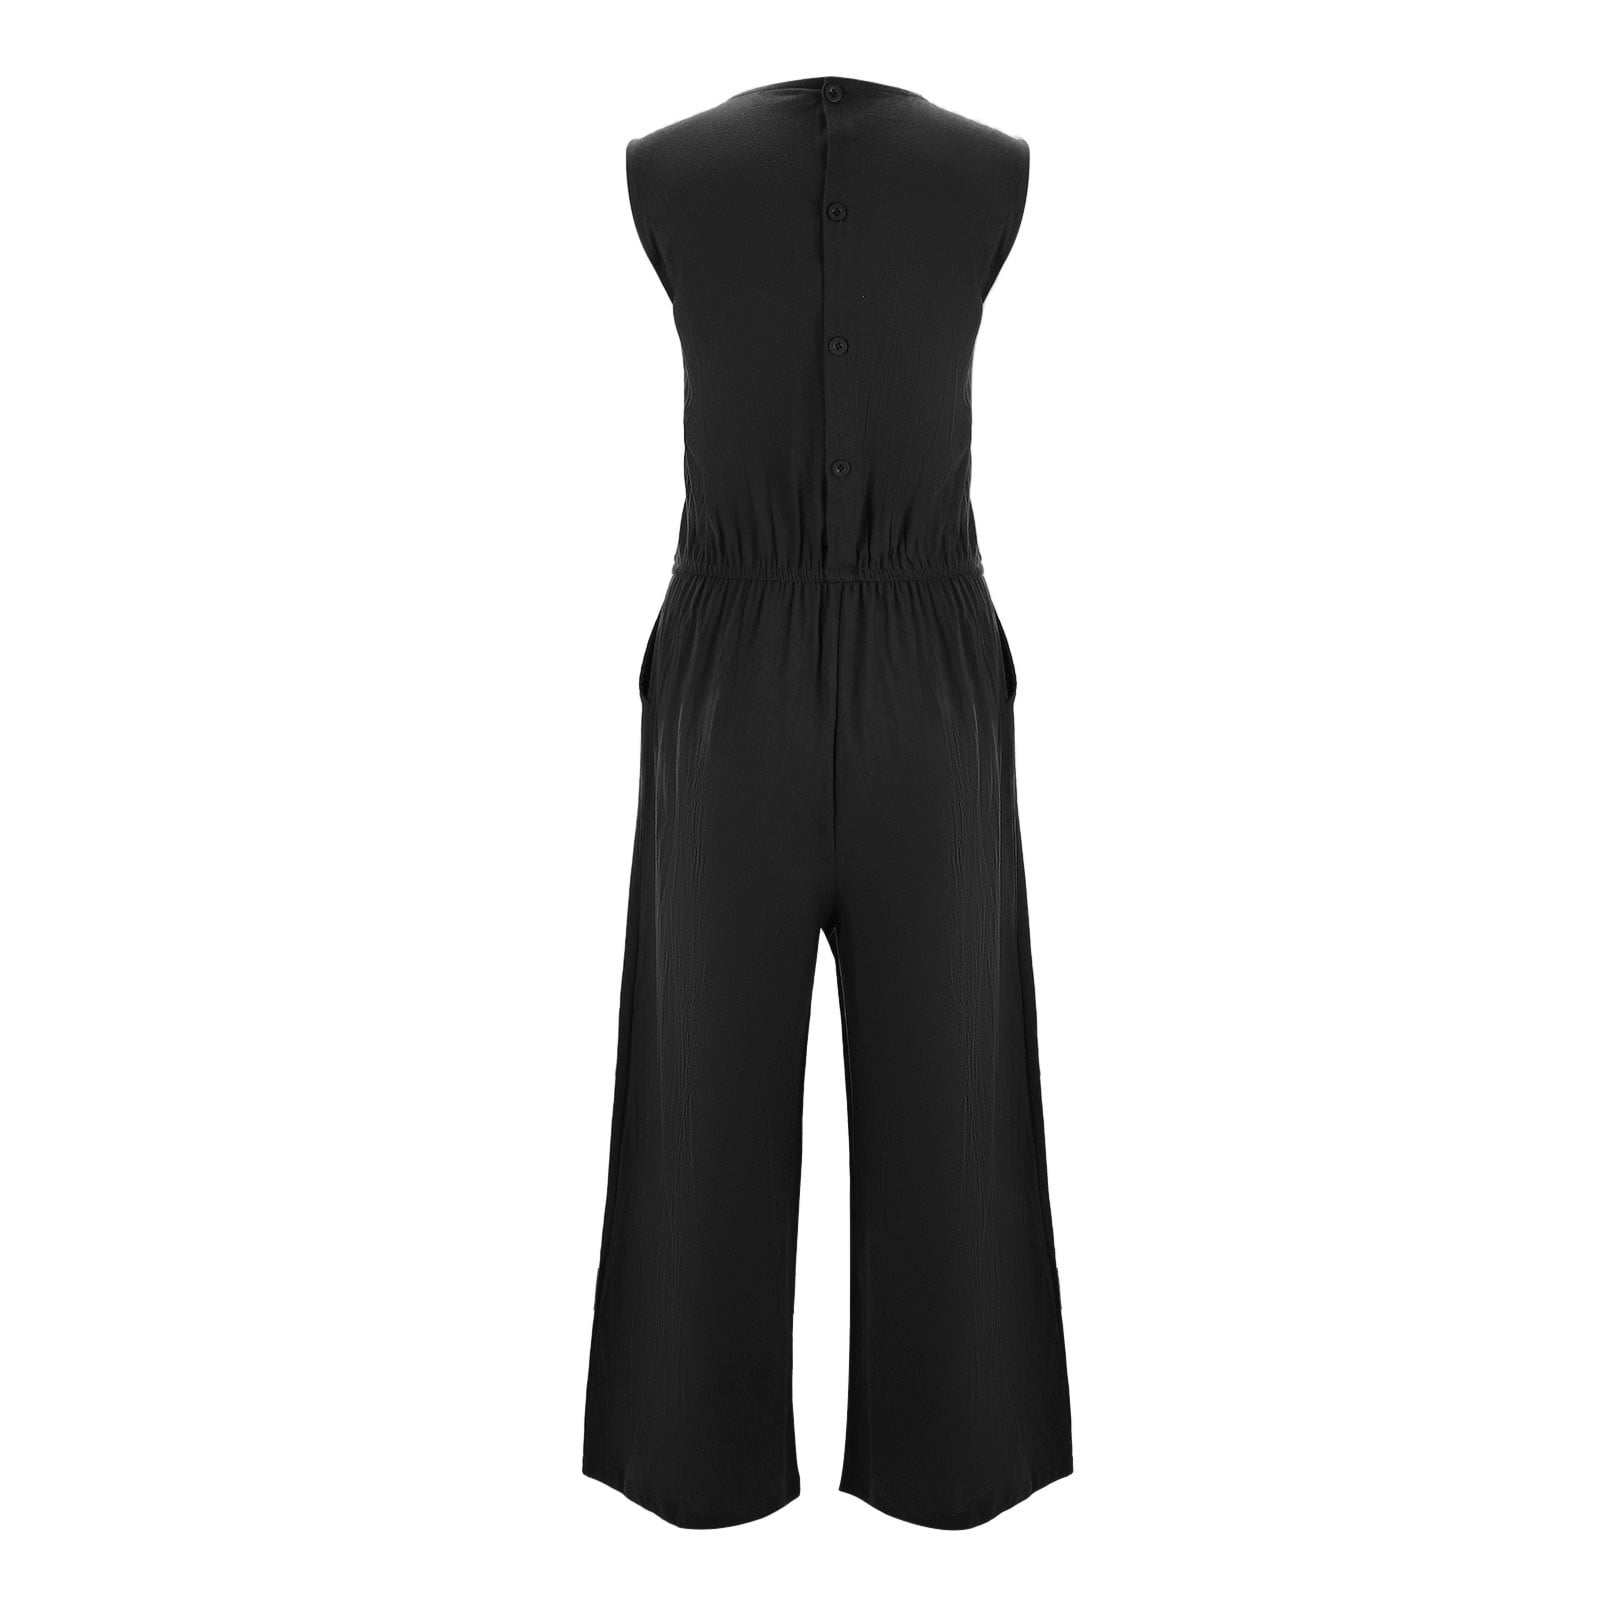 The 14 Most Flattering Jumpsuits For Every Body Type — The Candidly